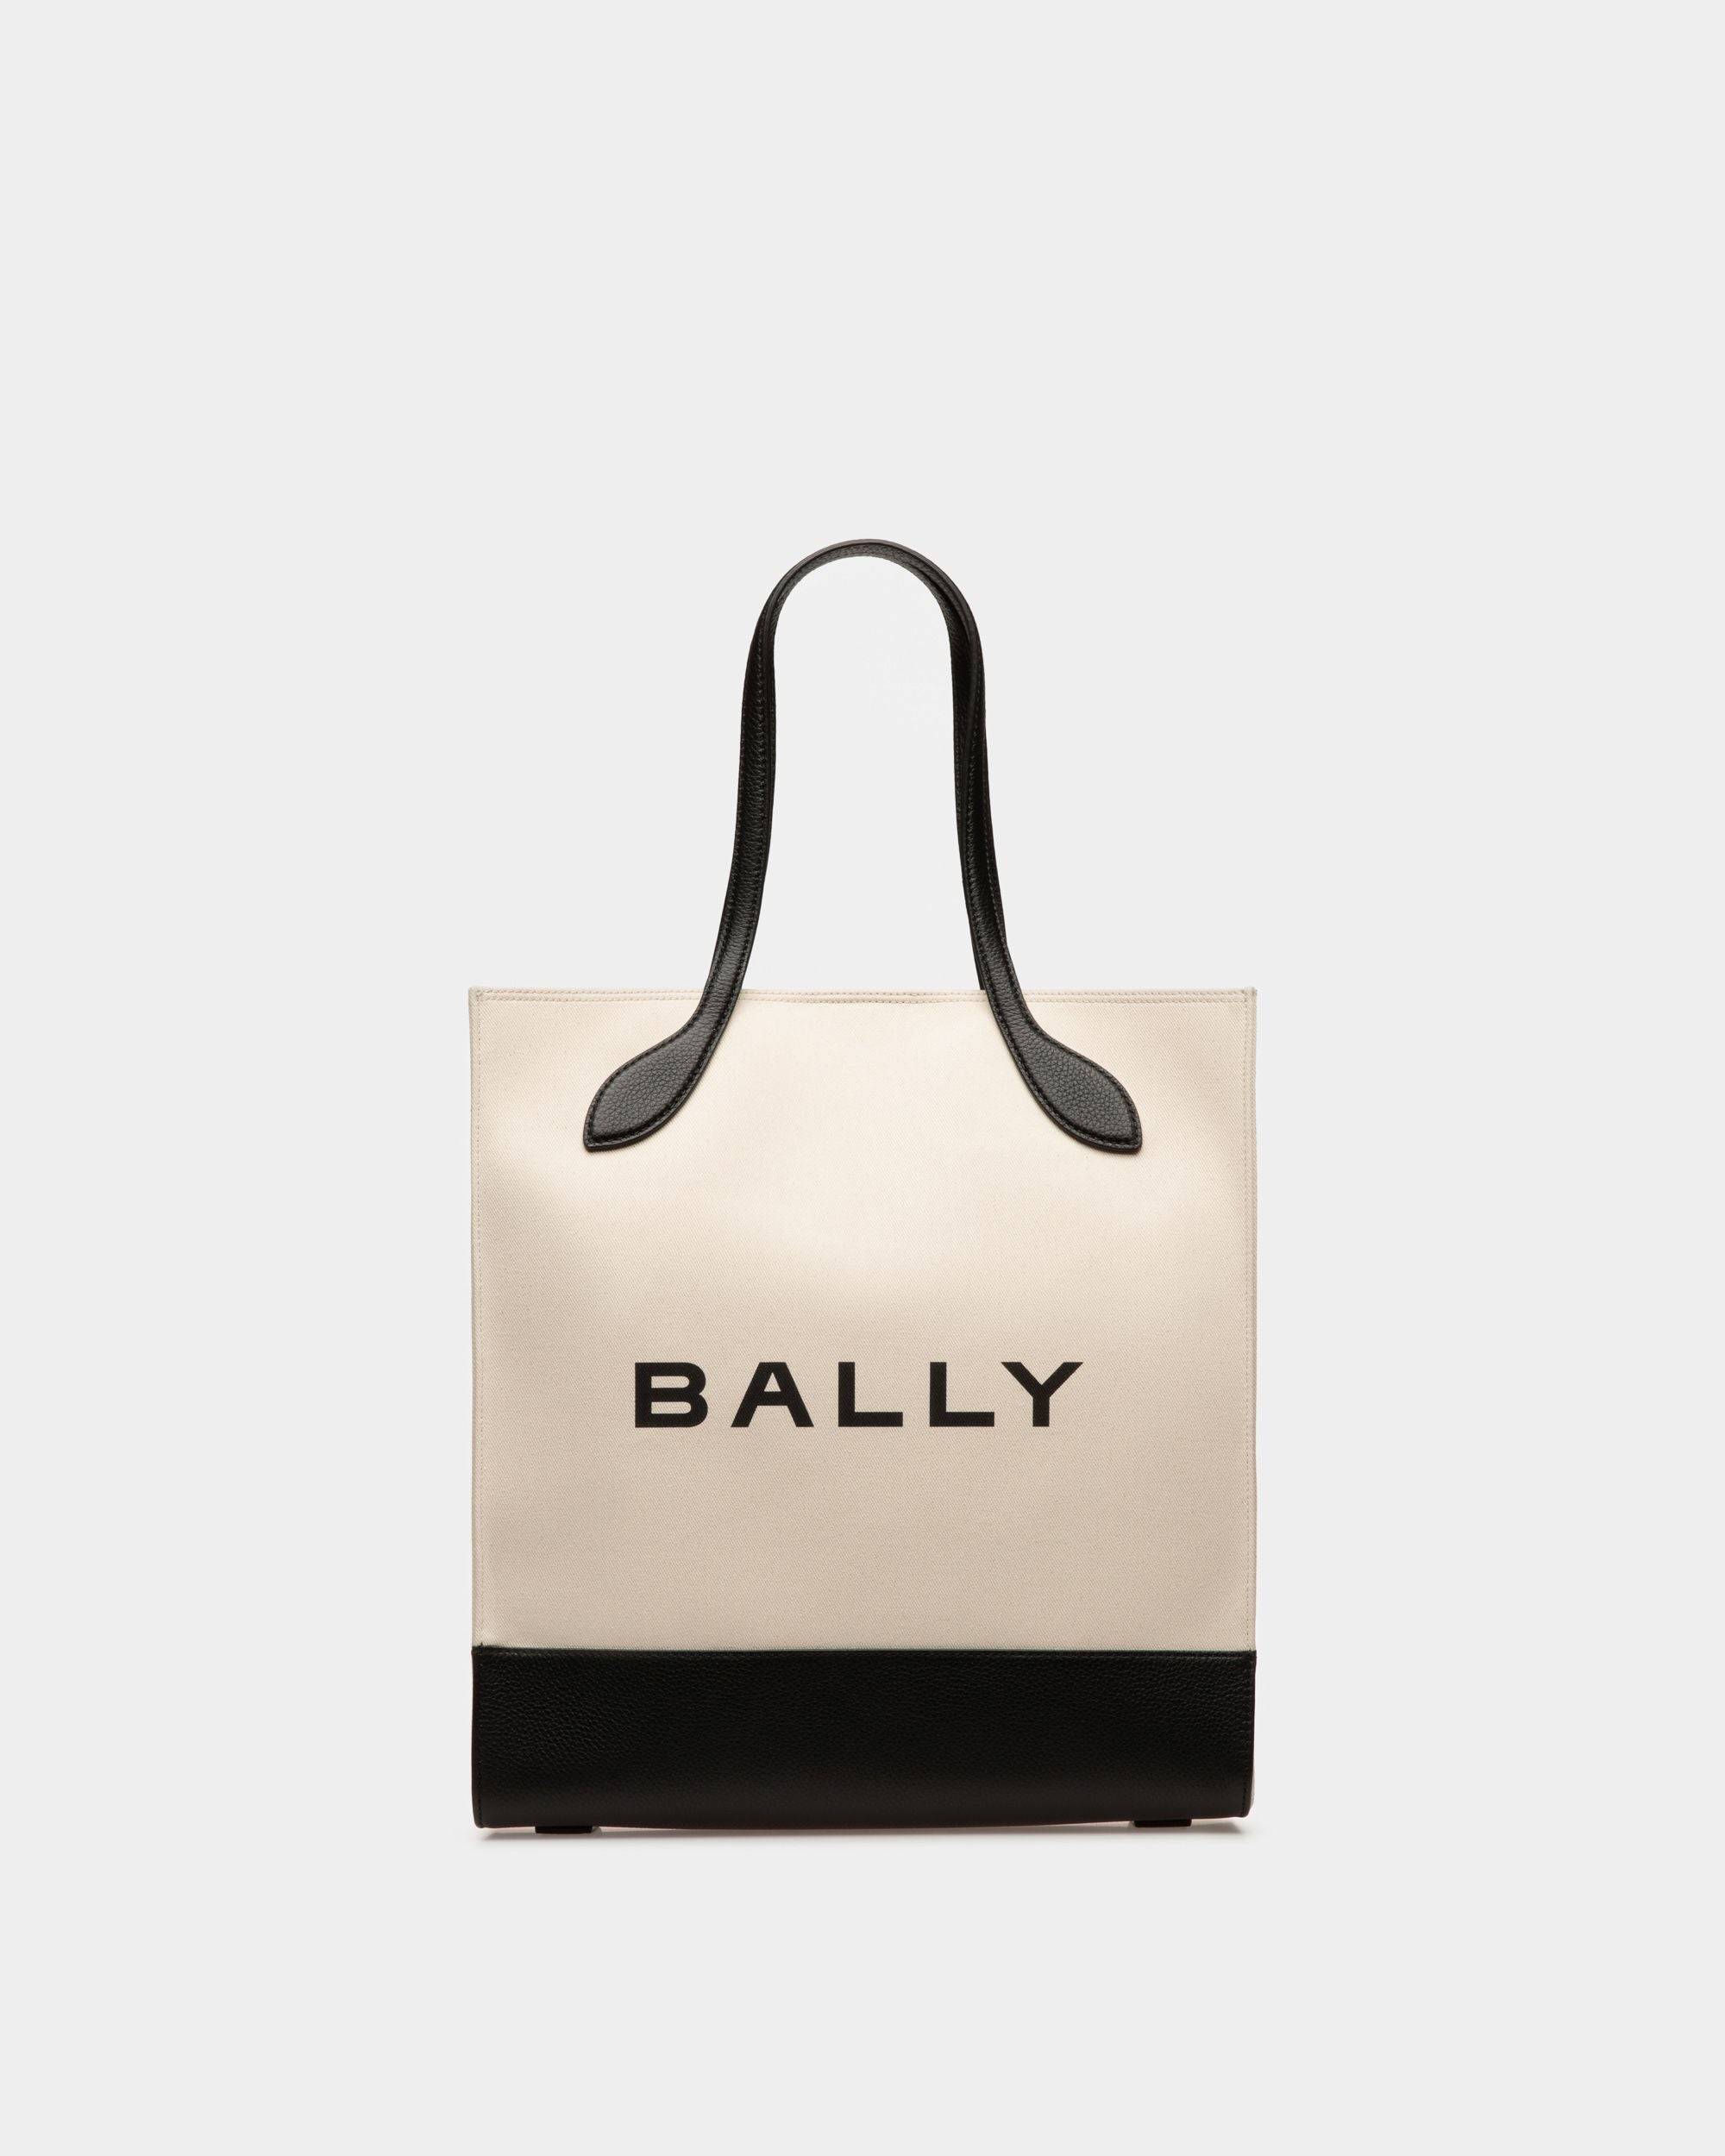 Keep On | Women's Tote Bag | Natural And Black Fabric | Bally | Still Life Front